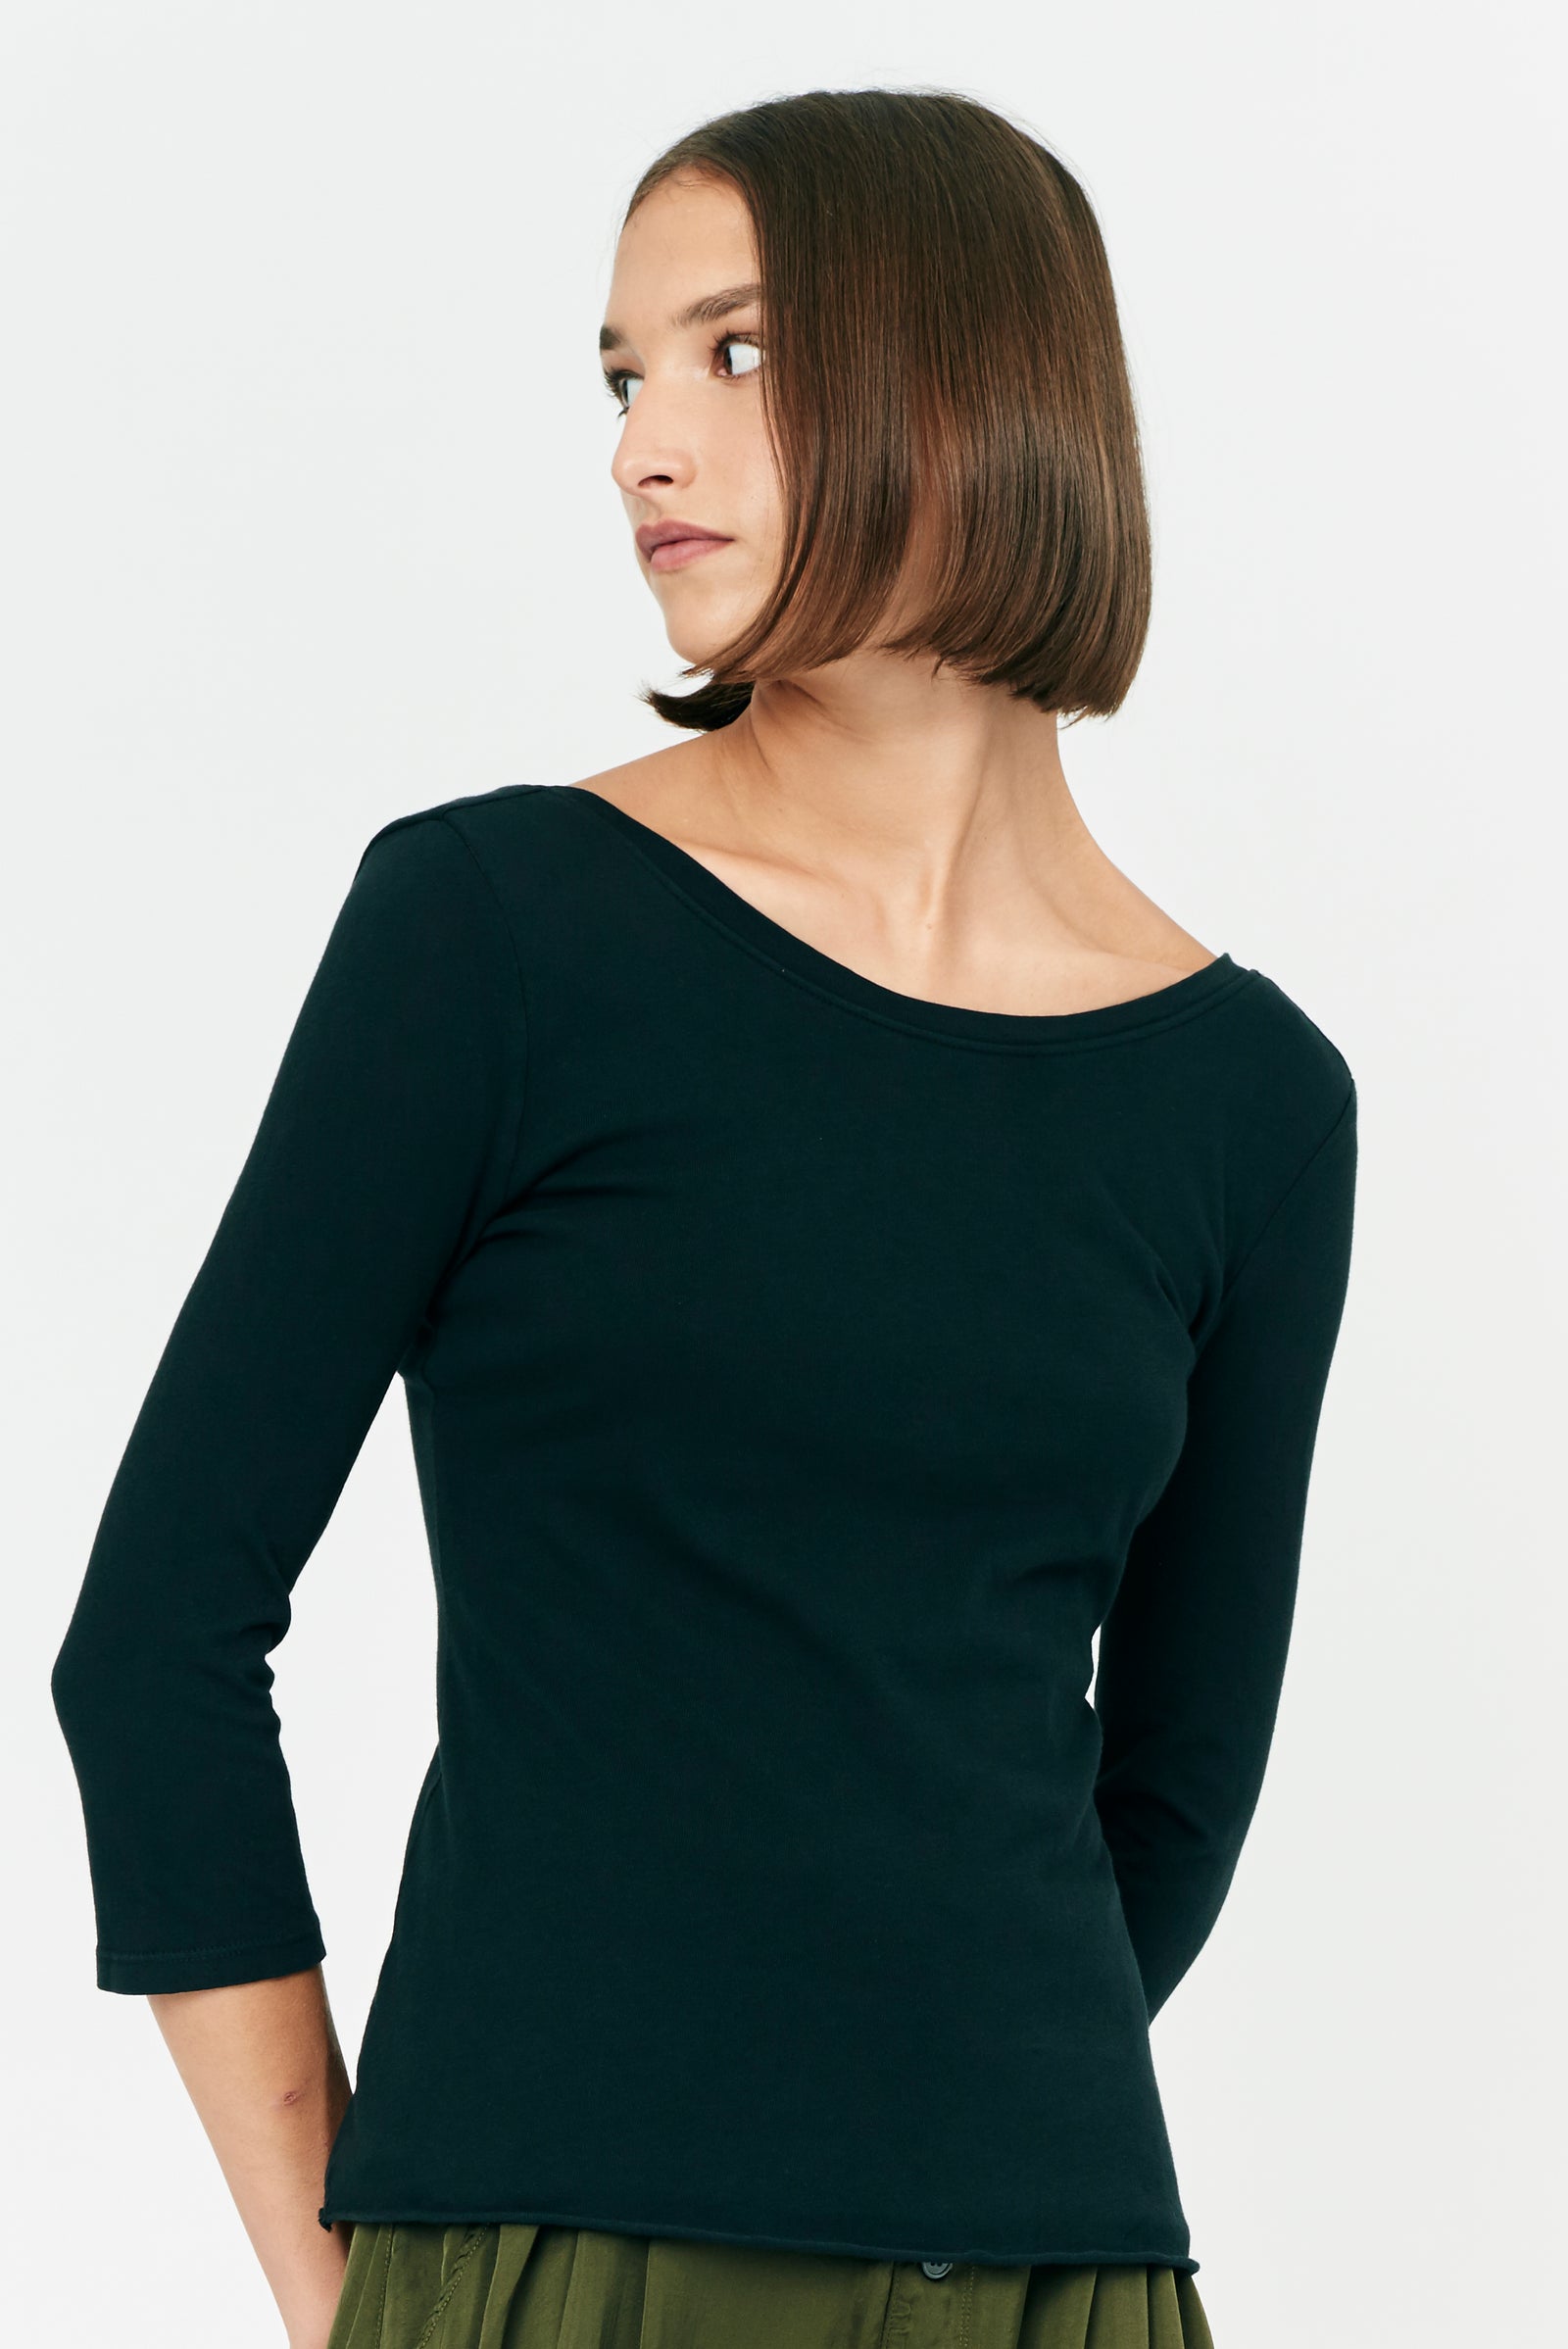 Black Classic Jersey Double Layer Top Front Close-Up View